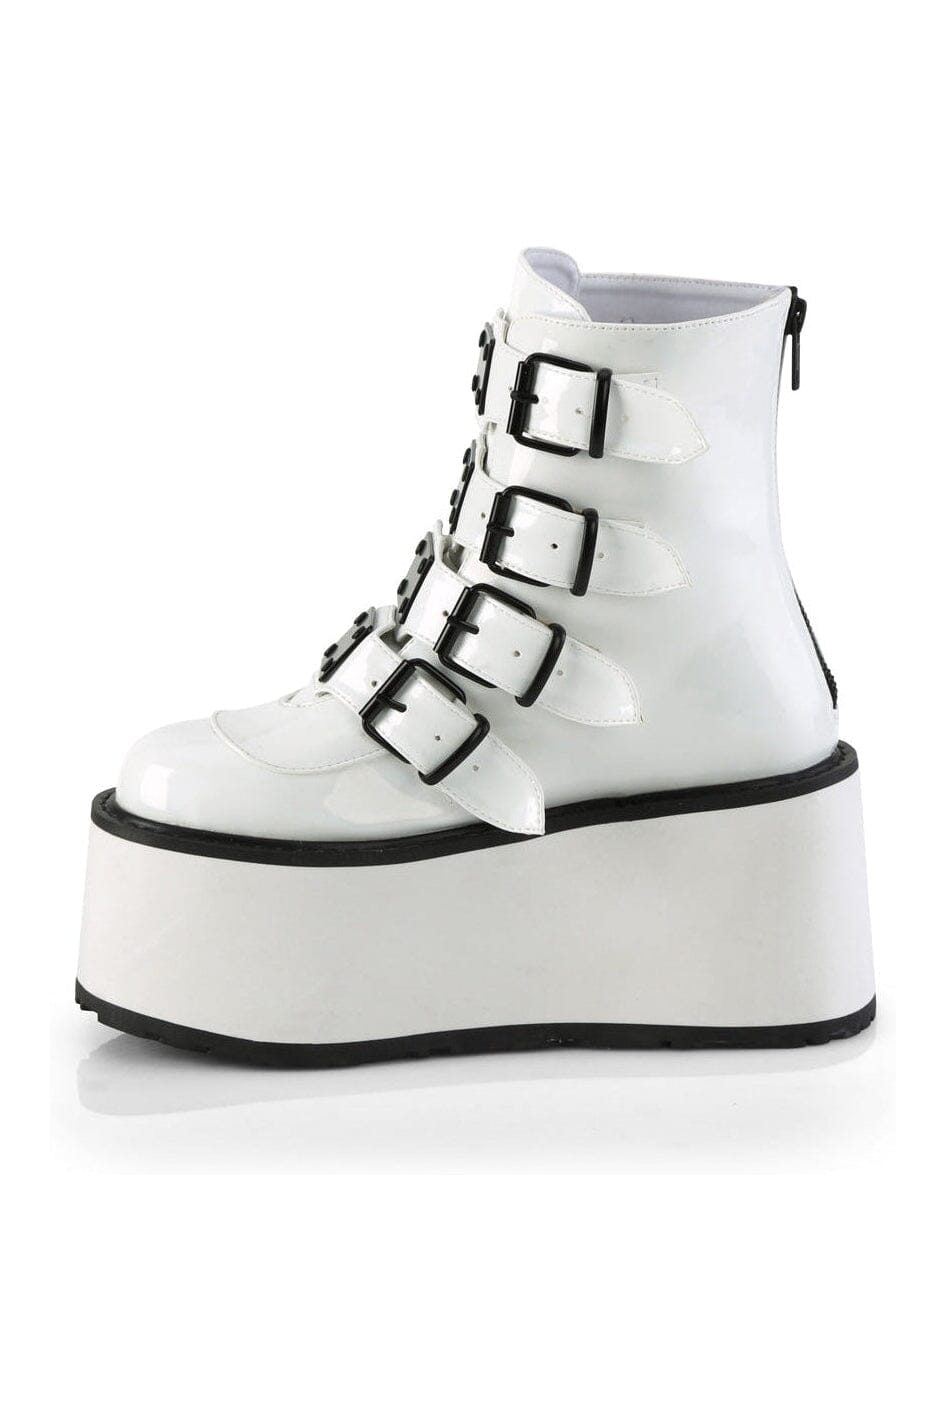 DAMNED-105 White Hologram Patent Ankle Boot-Ankle Boots-Demonia-SEXYSHOES.COM